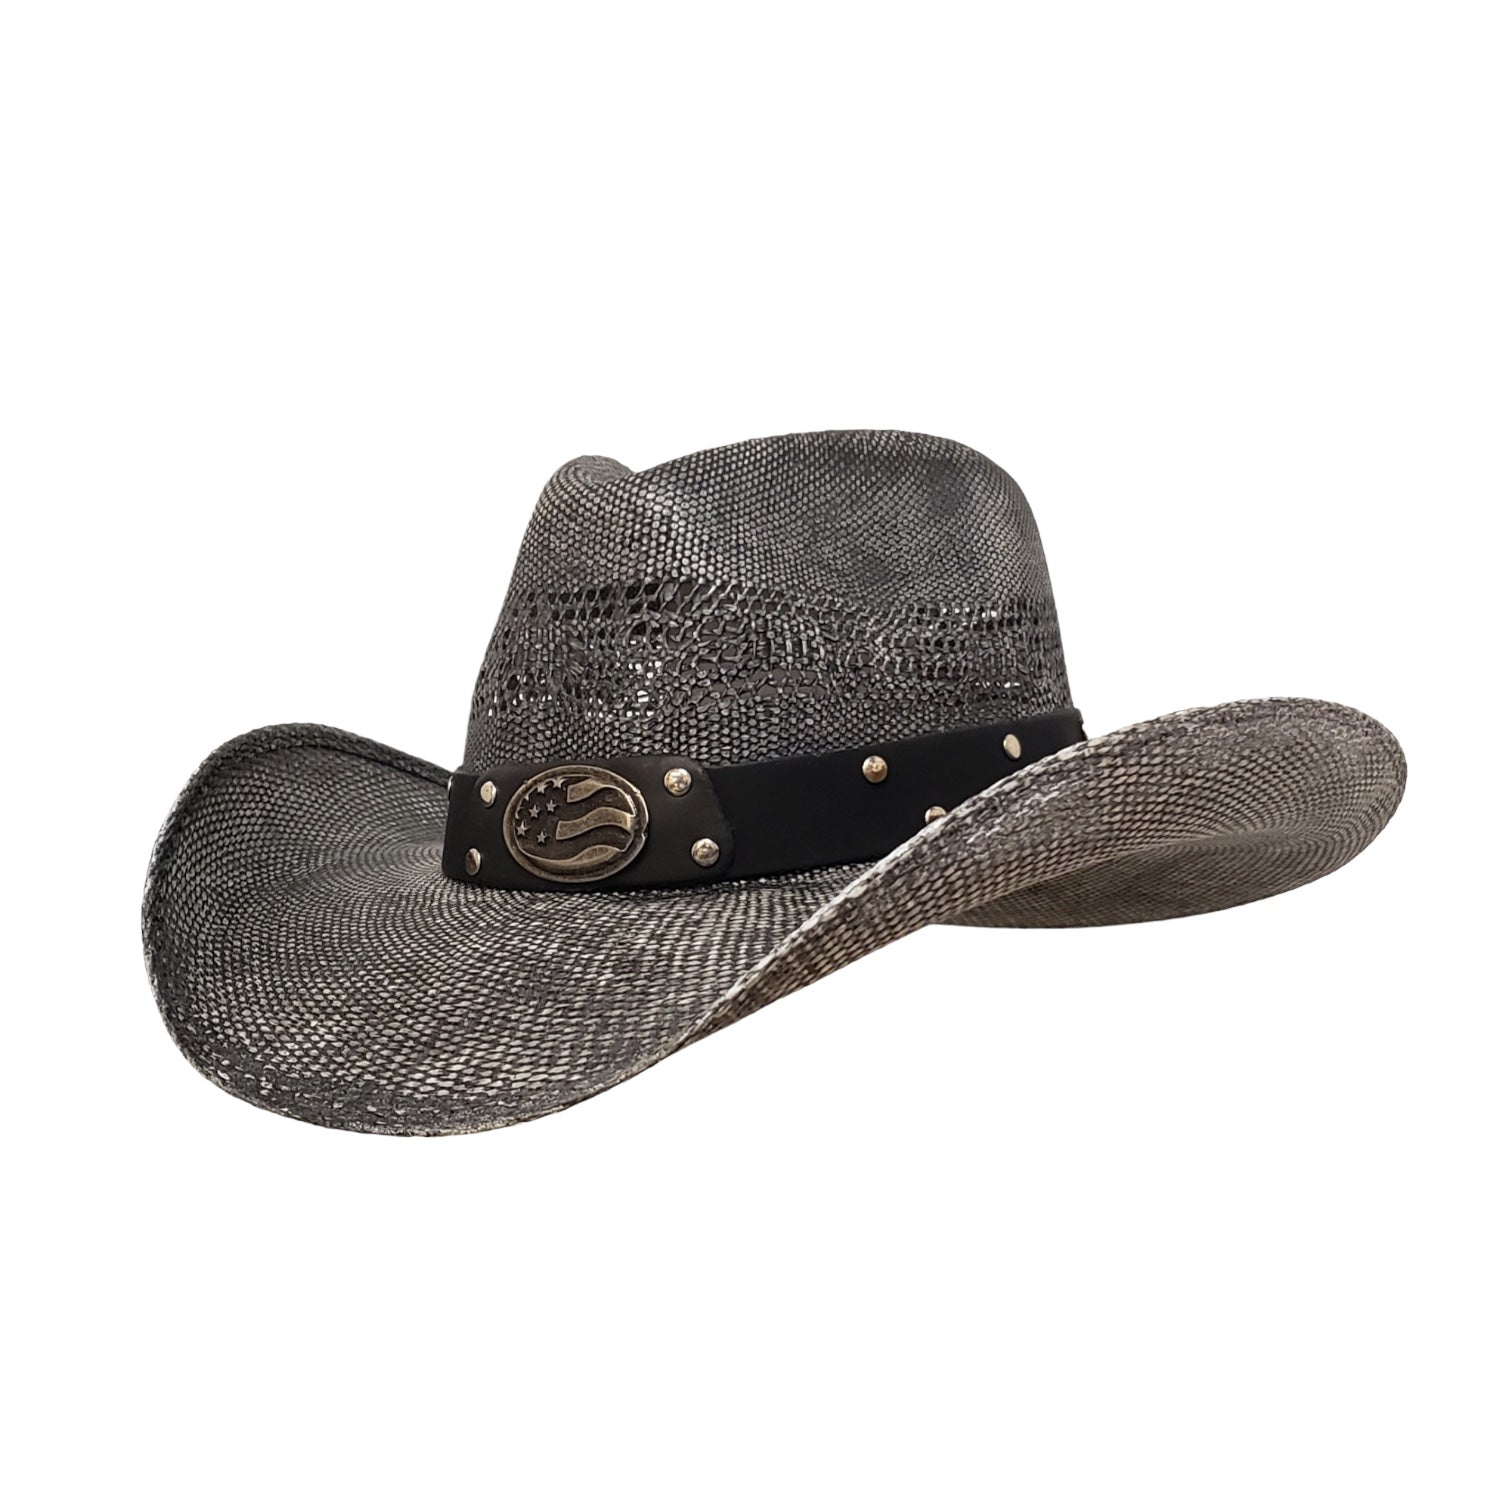 gray western hat, and the gray-toned American flag buckle on the hatband